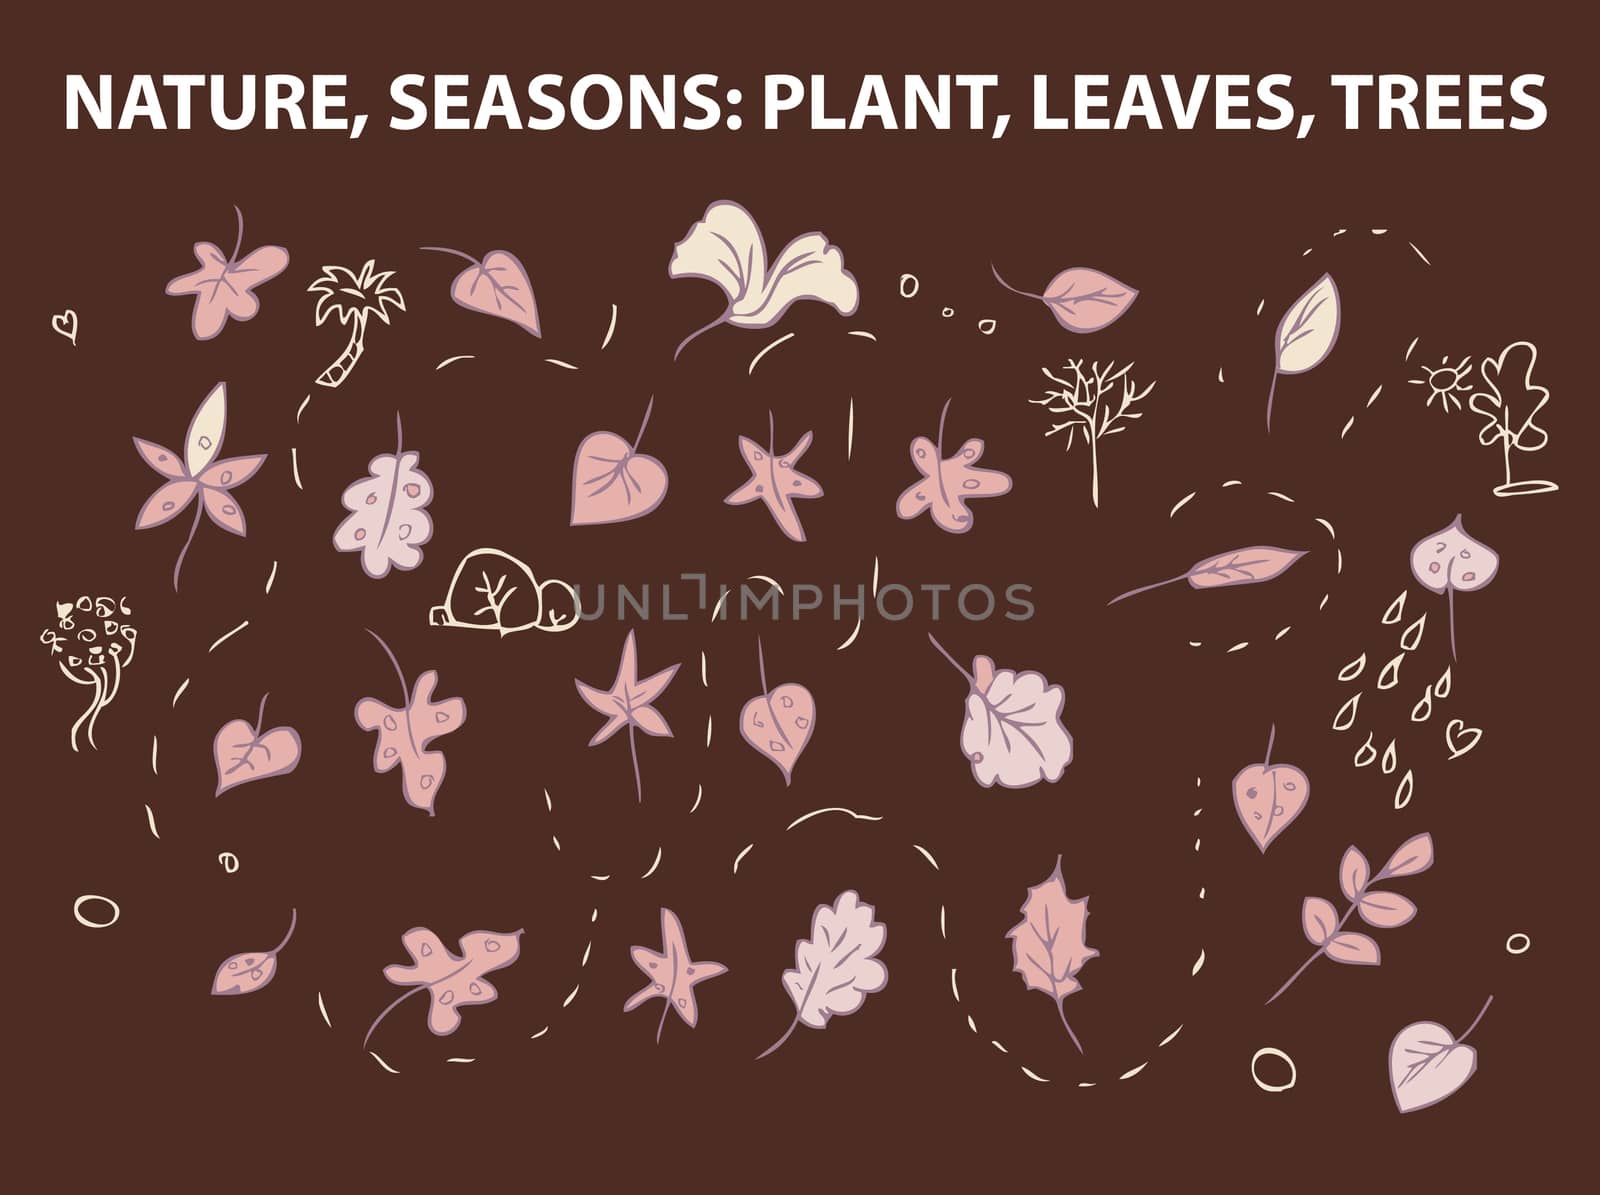 NATURE, SEASONS- PLANT, LEAVES, TREES by IconsJewelry